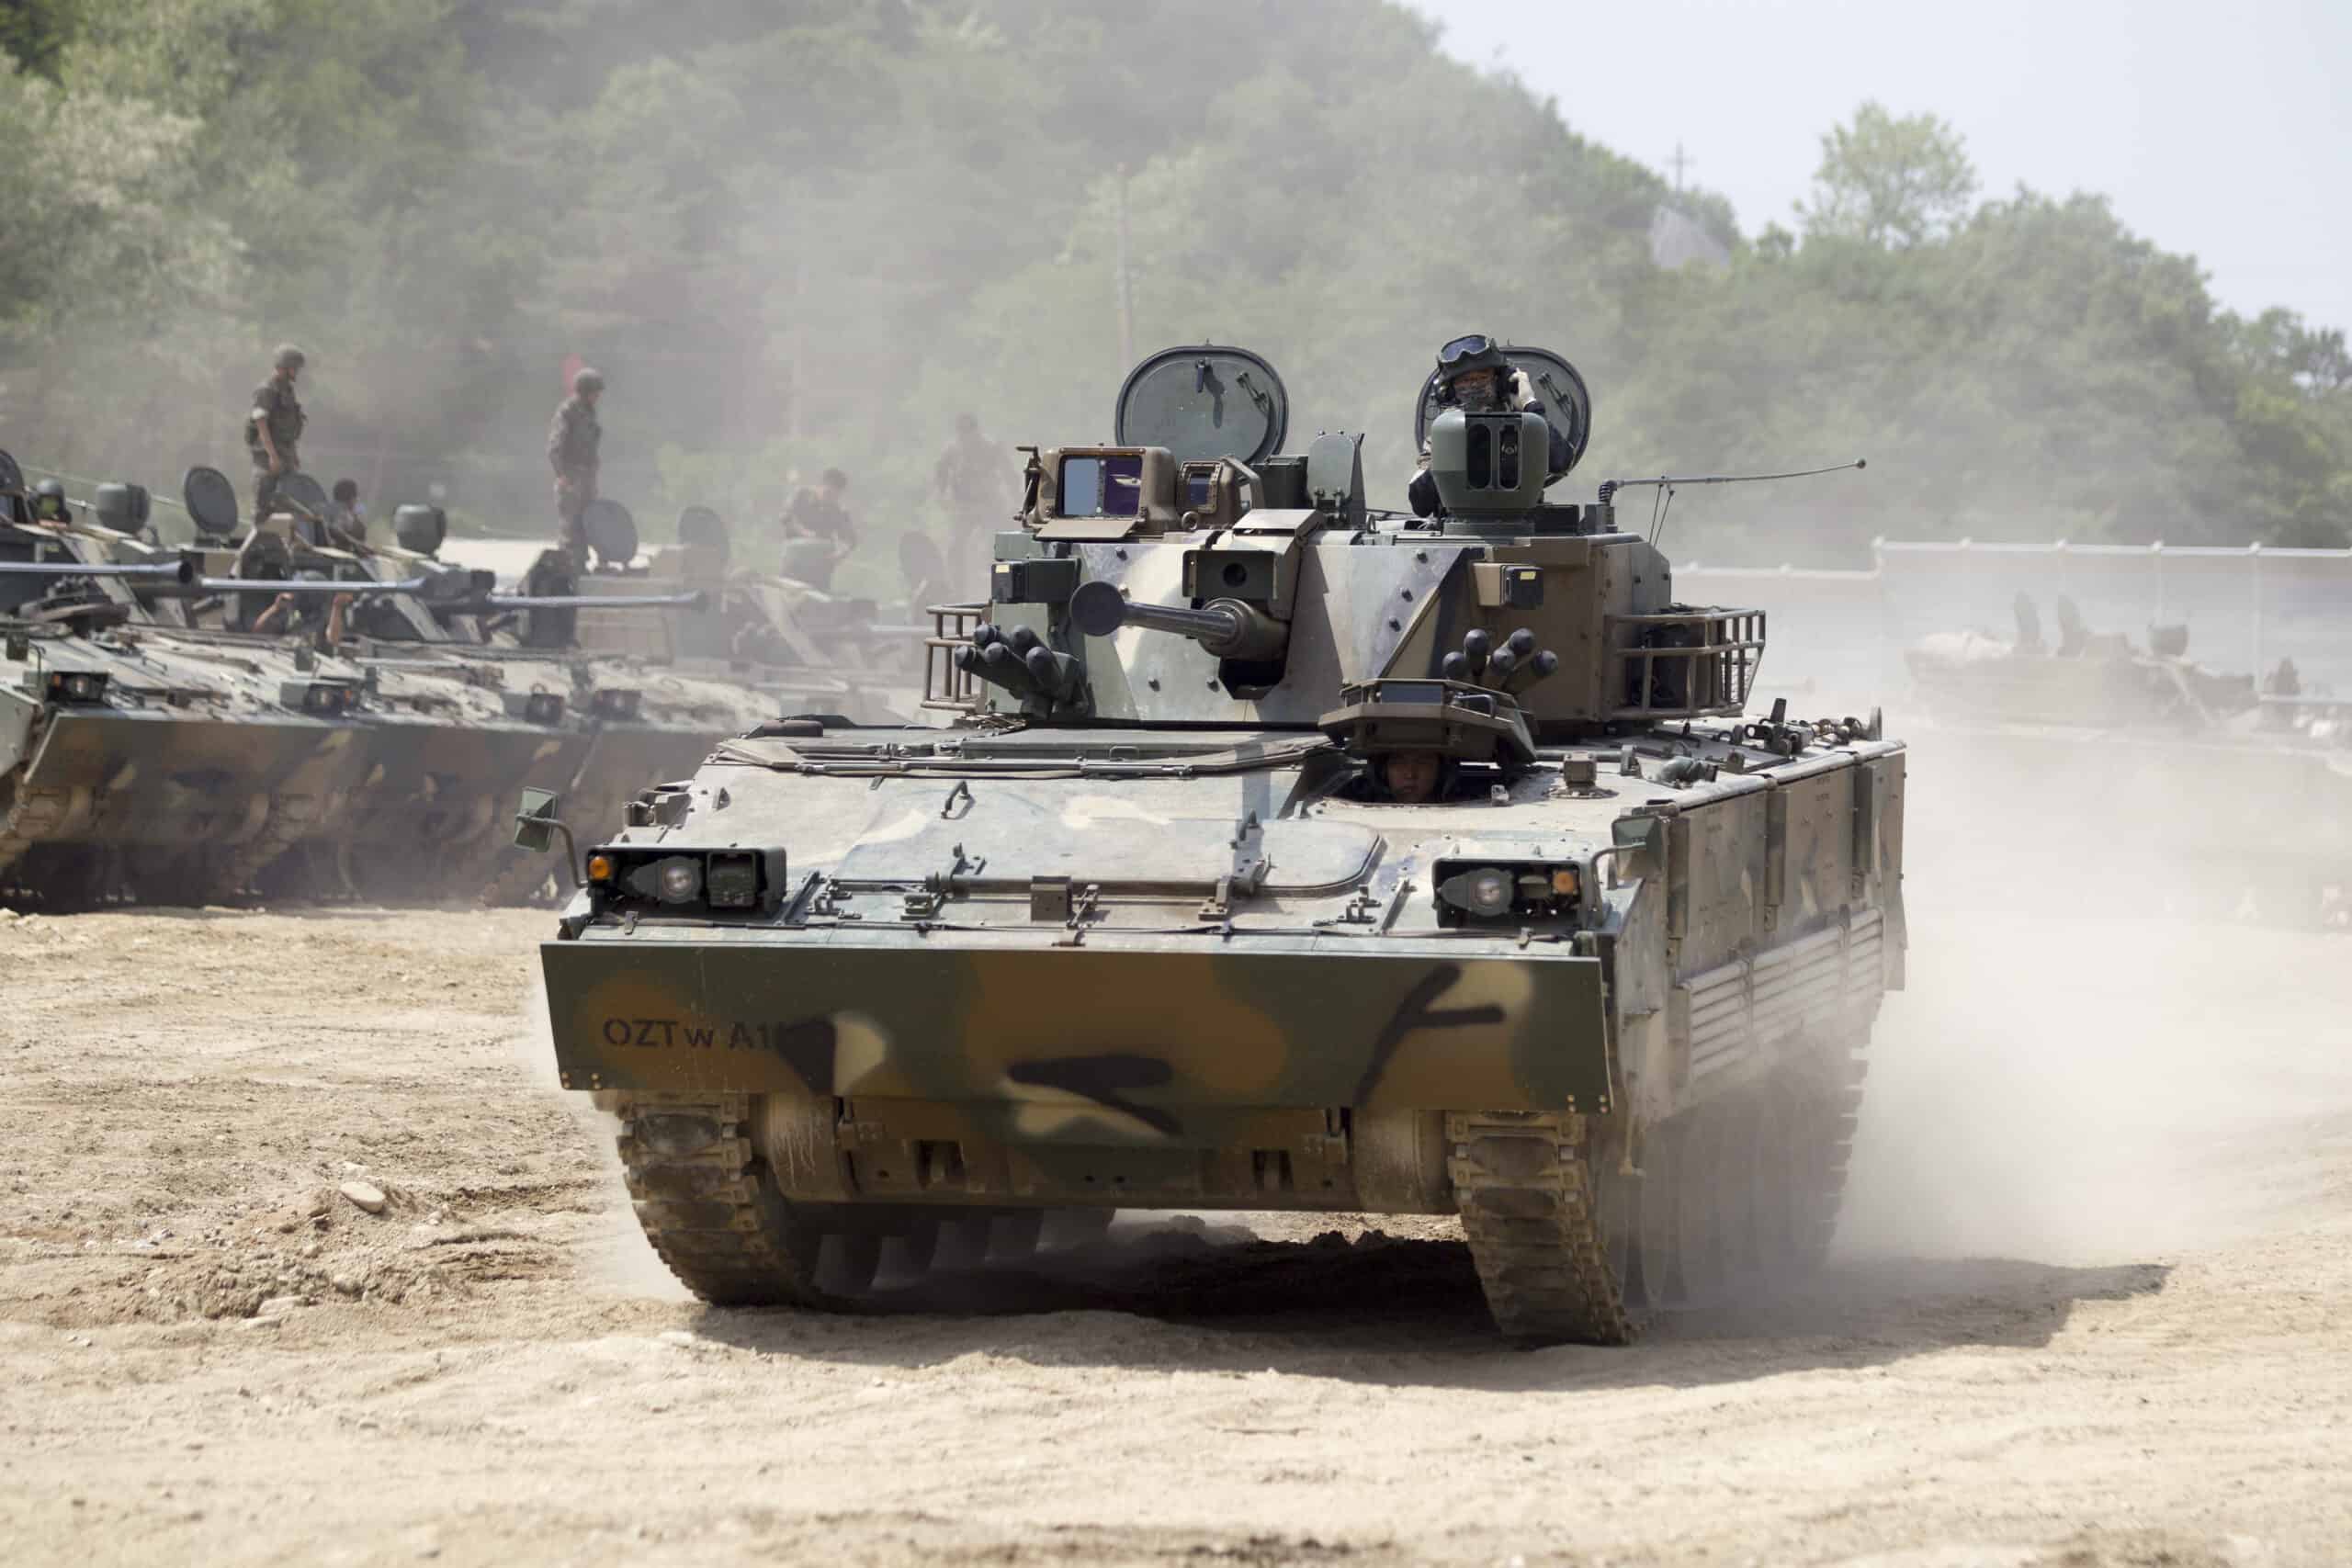 K-21 combat firing practice, Republic of Korea Army Capital Mechanized Infantry Division by ub300ud55cubbfcuad6d uad6duad70 Republic of Korea Armed Forces